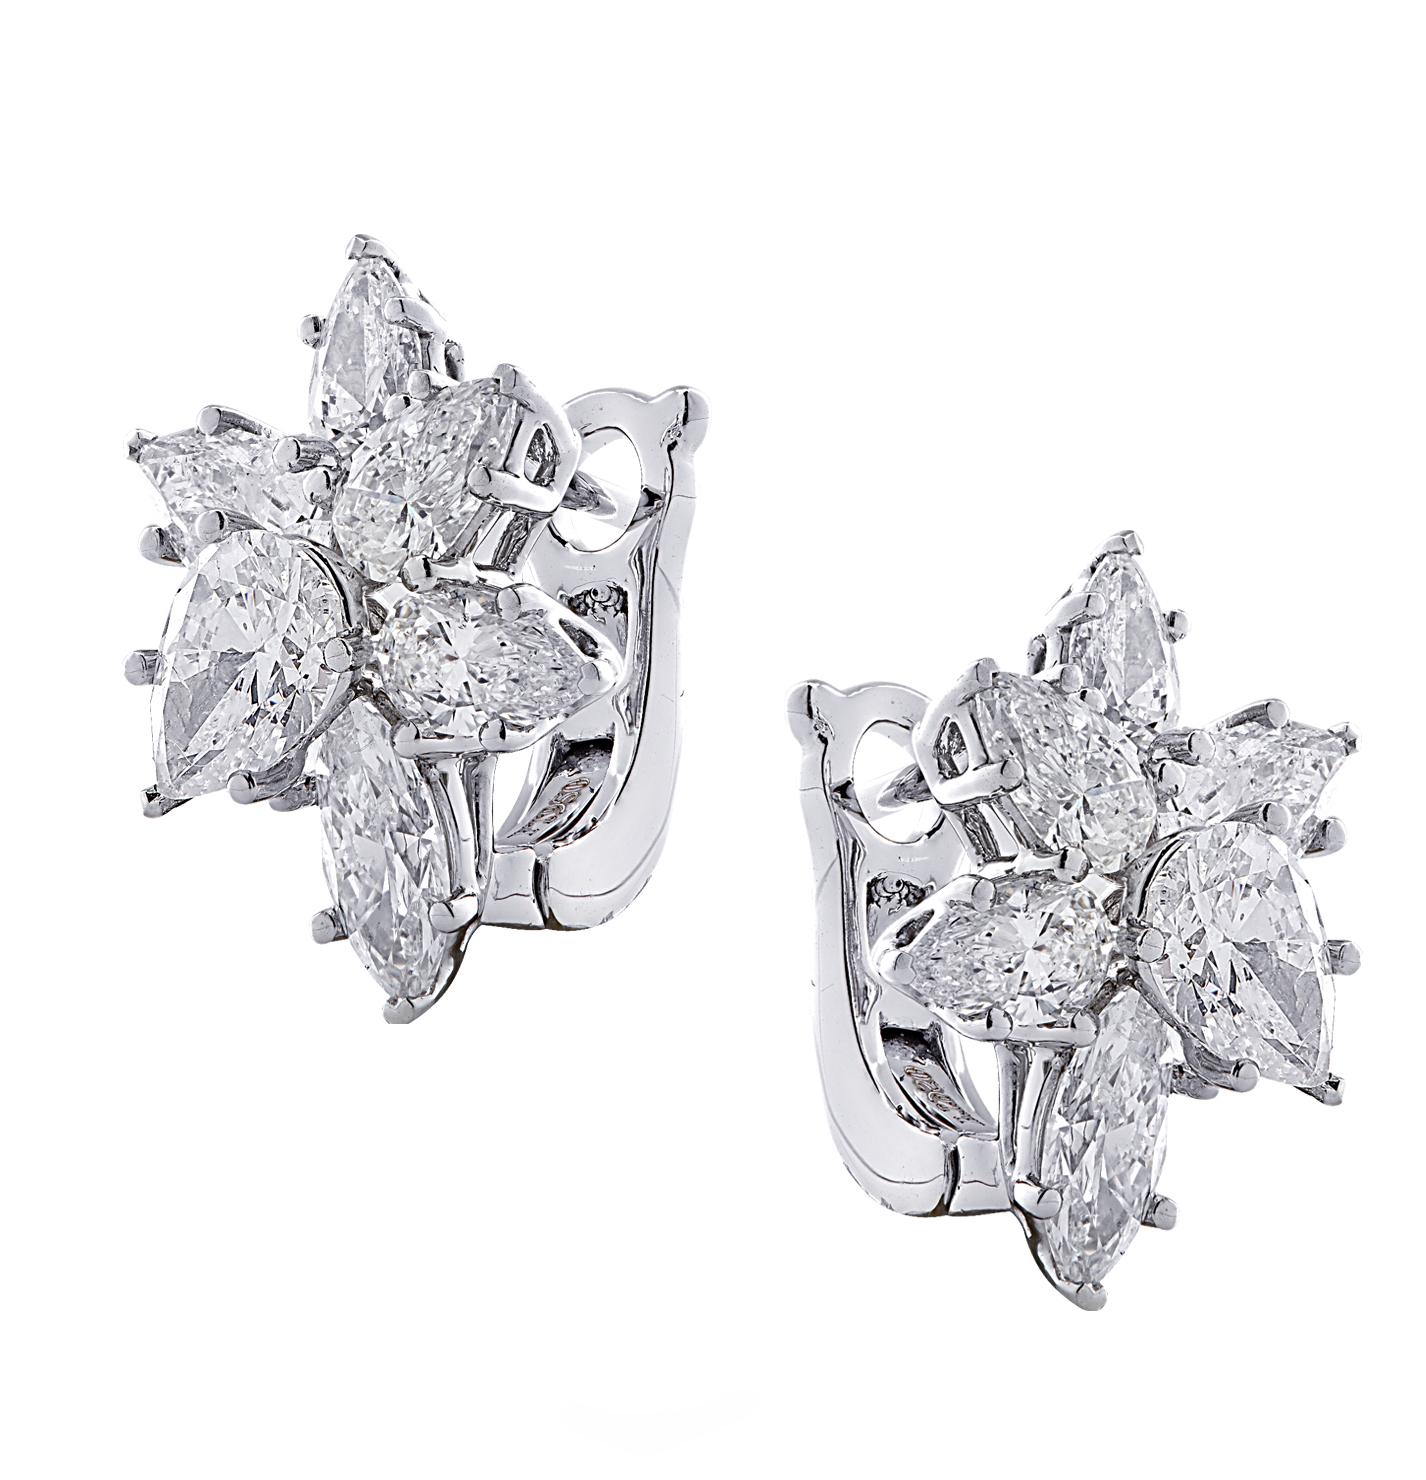 Sensational Vivid Diamonds earrings, custom made in platinum, showcasing 12 pear shape and marquise cut diamonds weighing 6.04 carats total, G-H color SI clarity. The diamonds are arranged in spectacular flowers, capturing the unparalleled beauty of